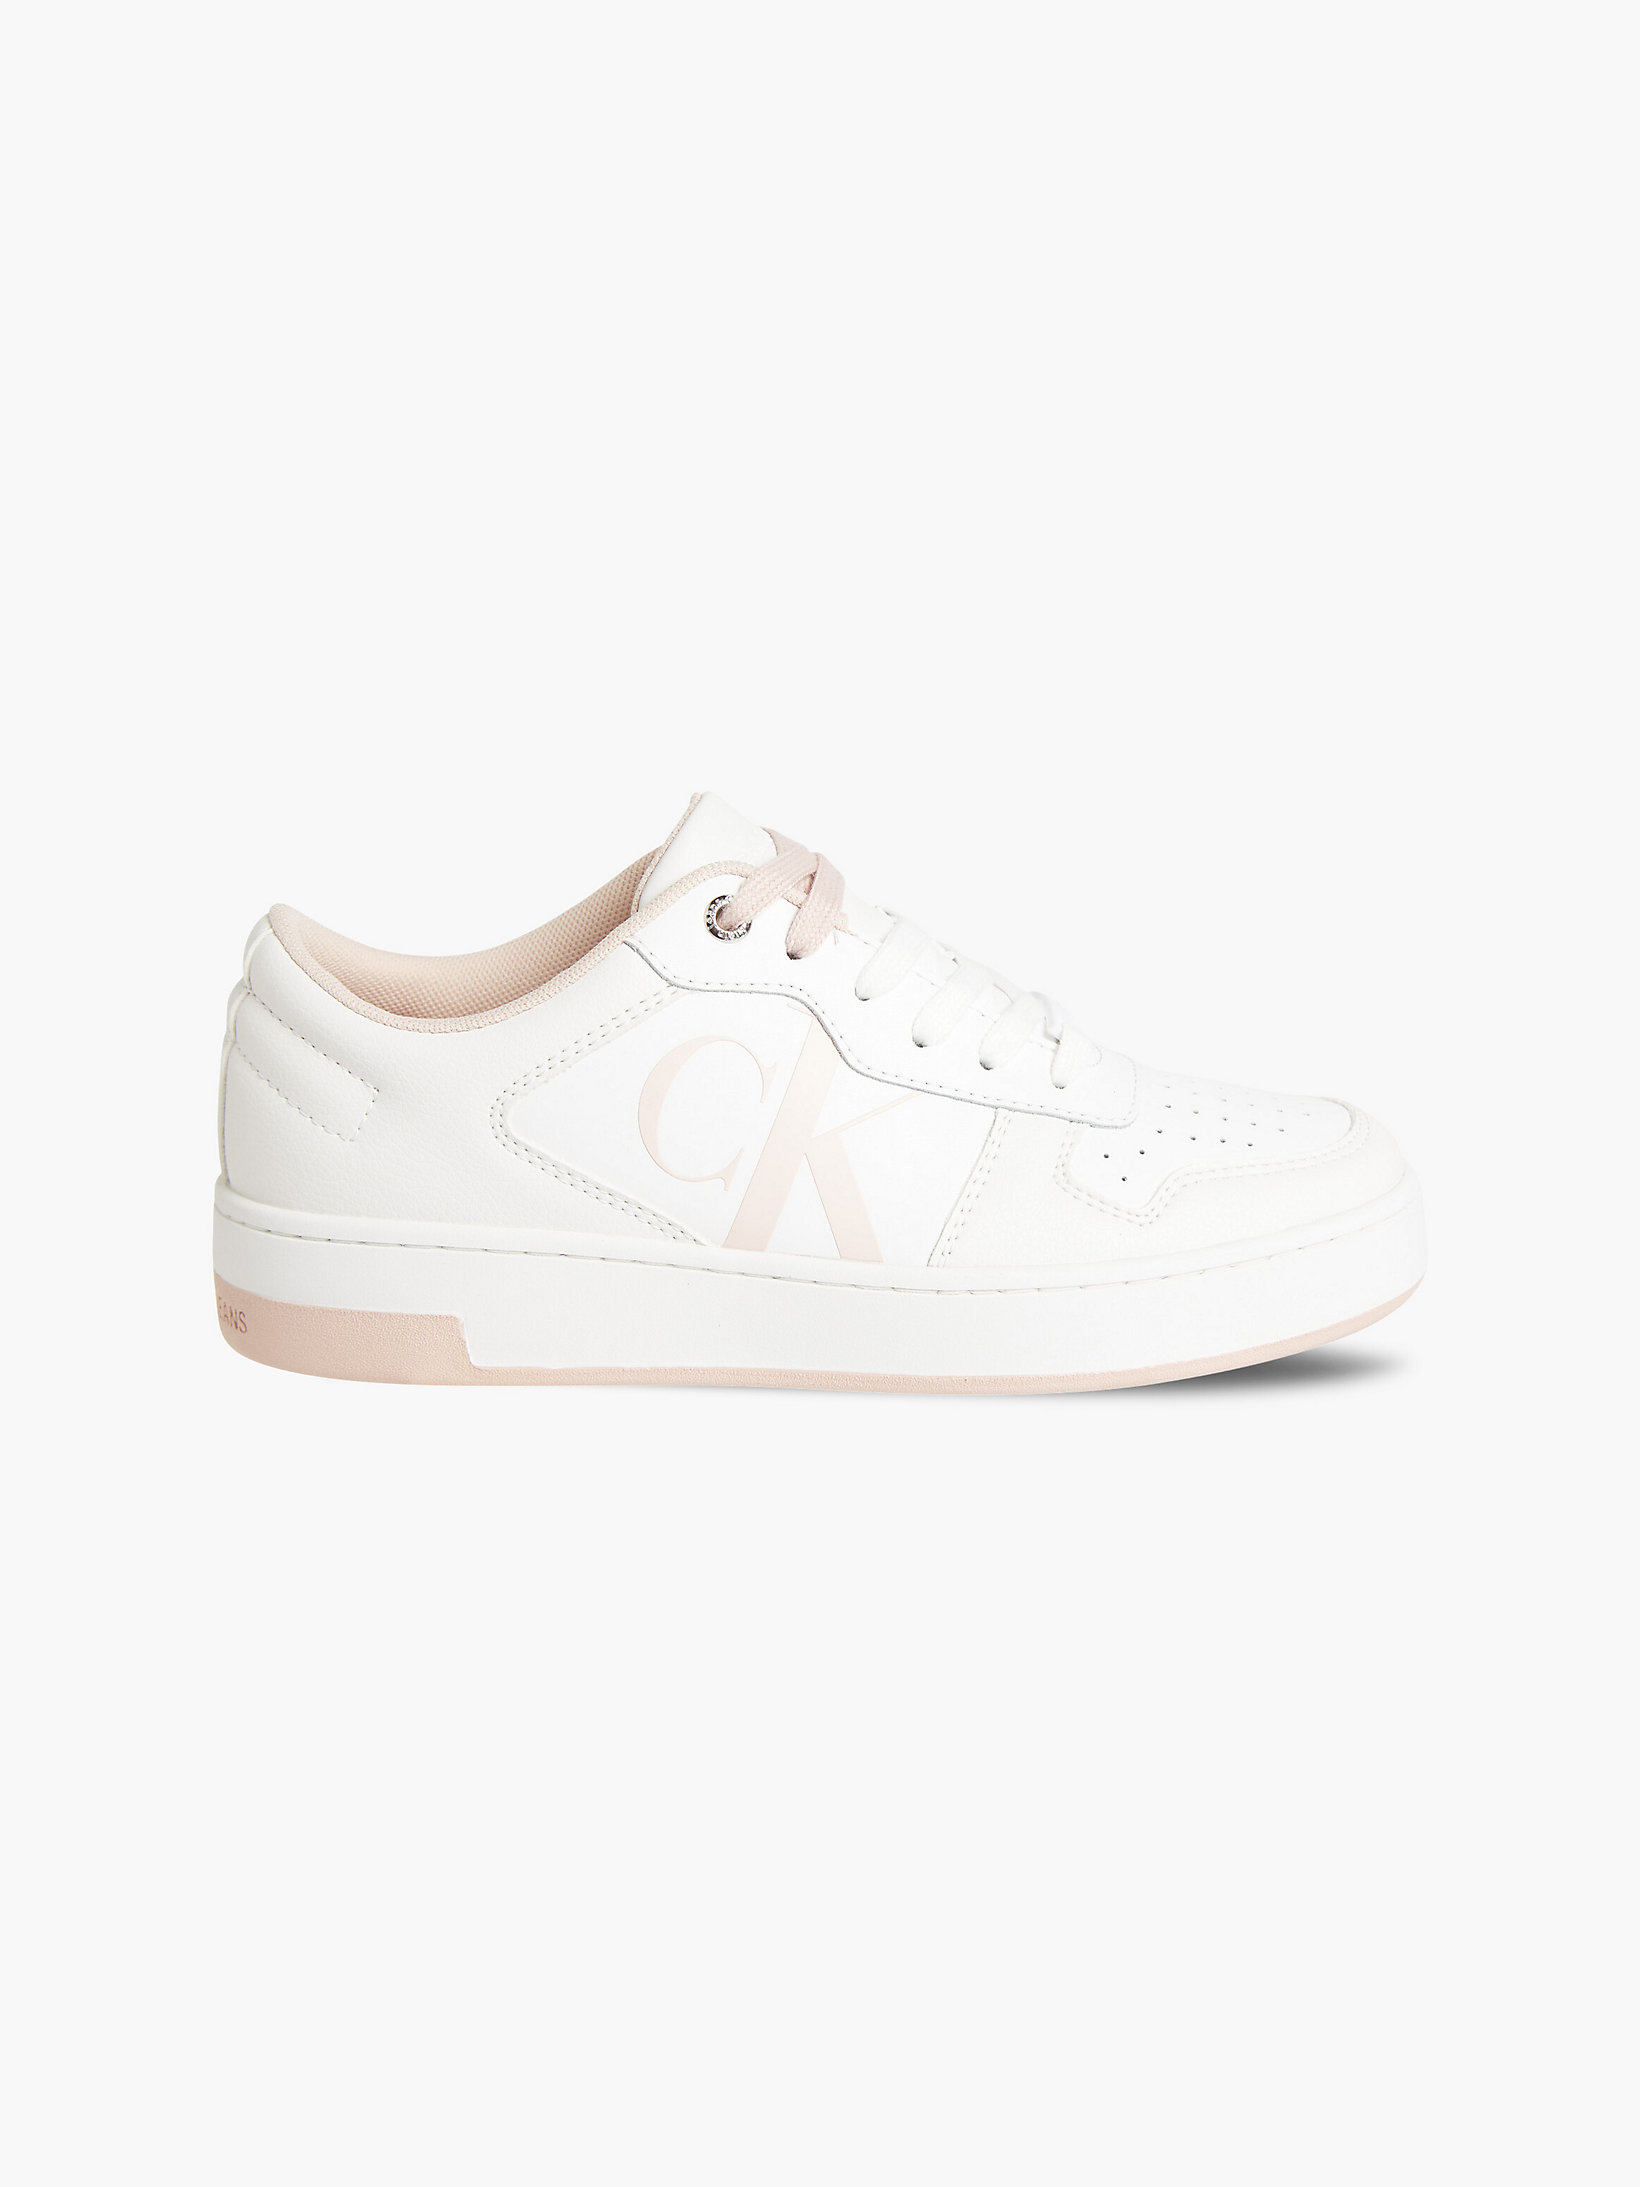 Sneakers In Pelle > White/pink Blush > undefined donna > Calvin Klein